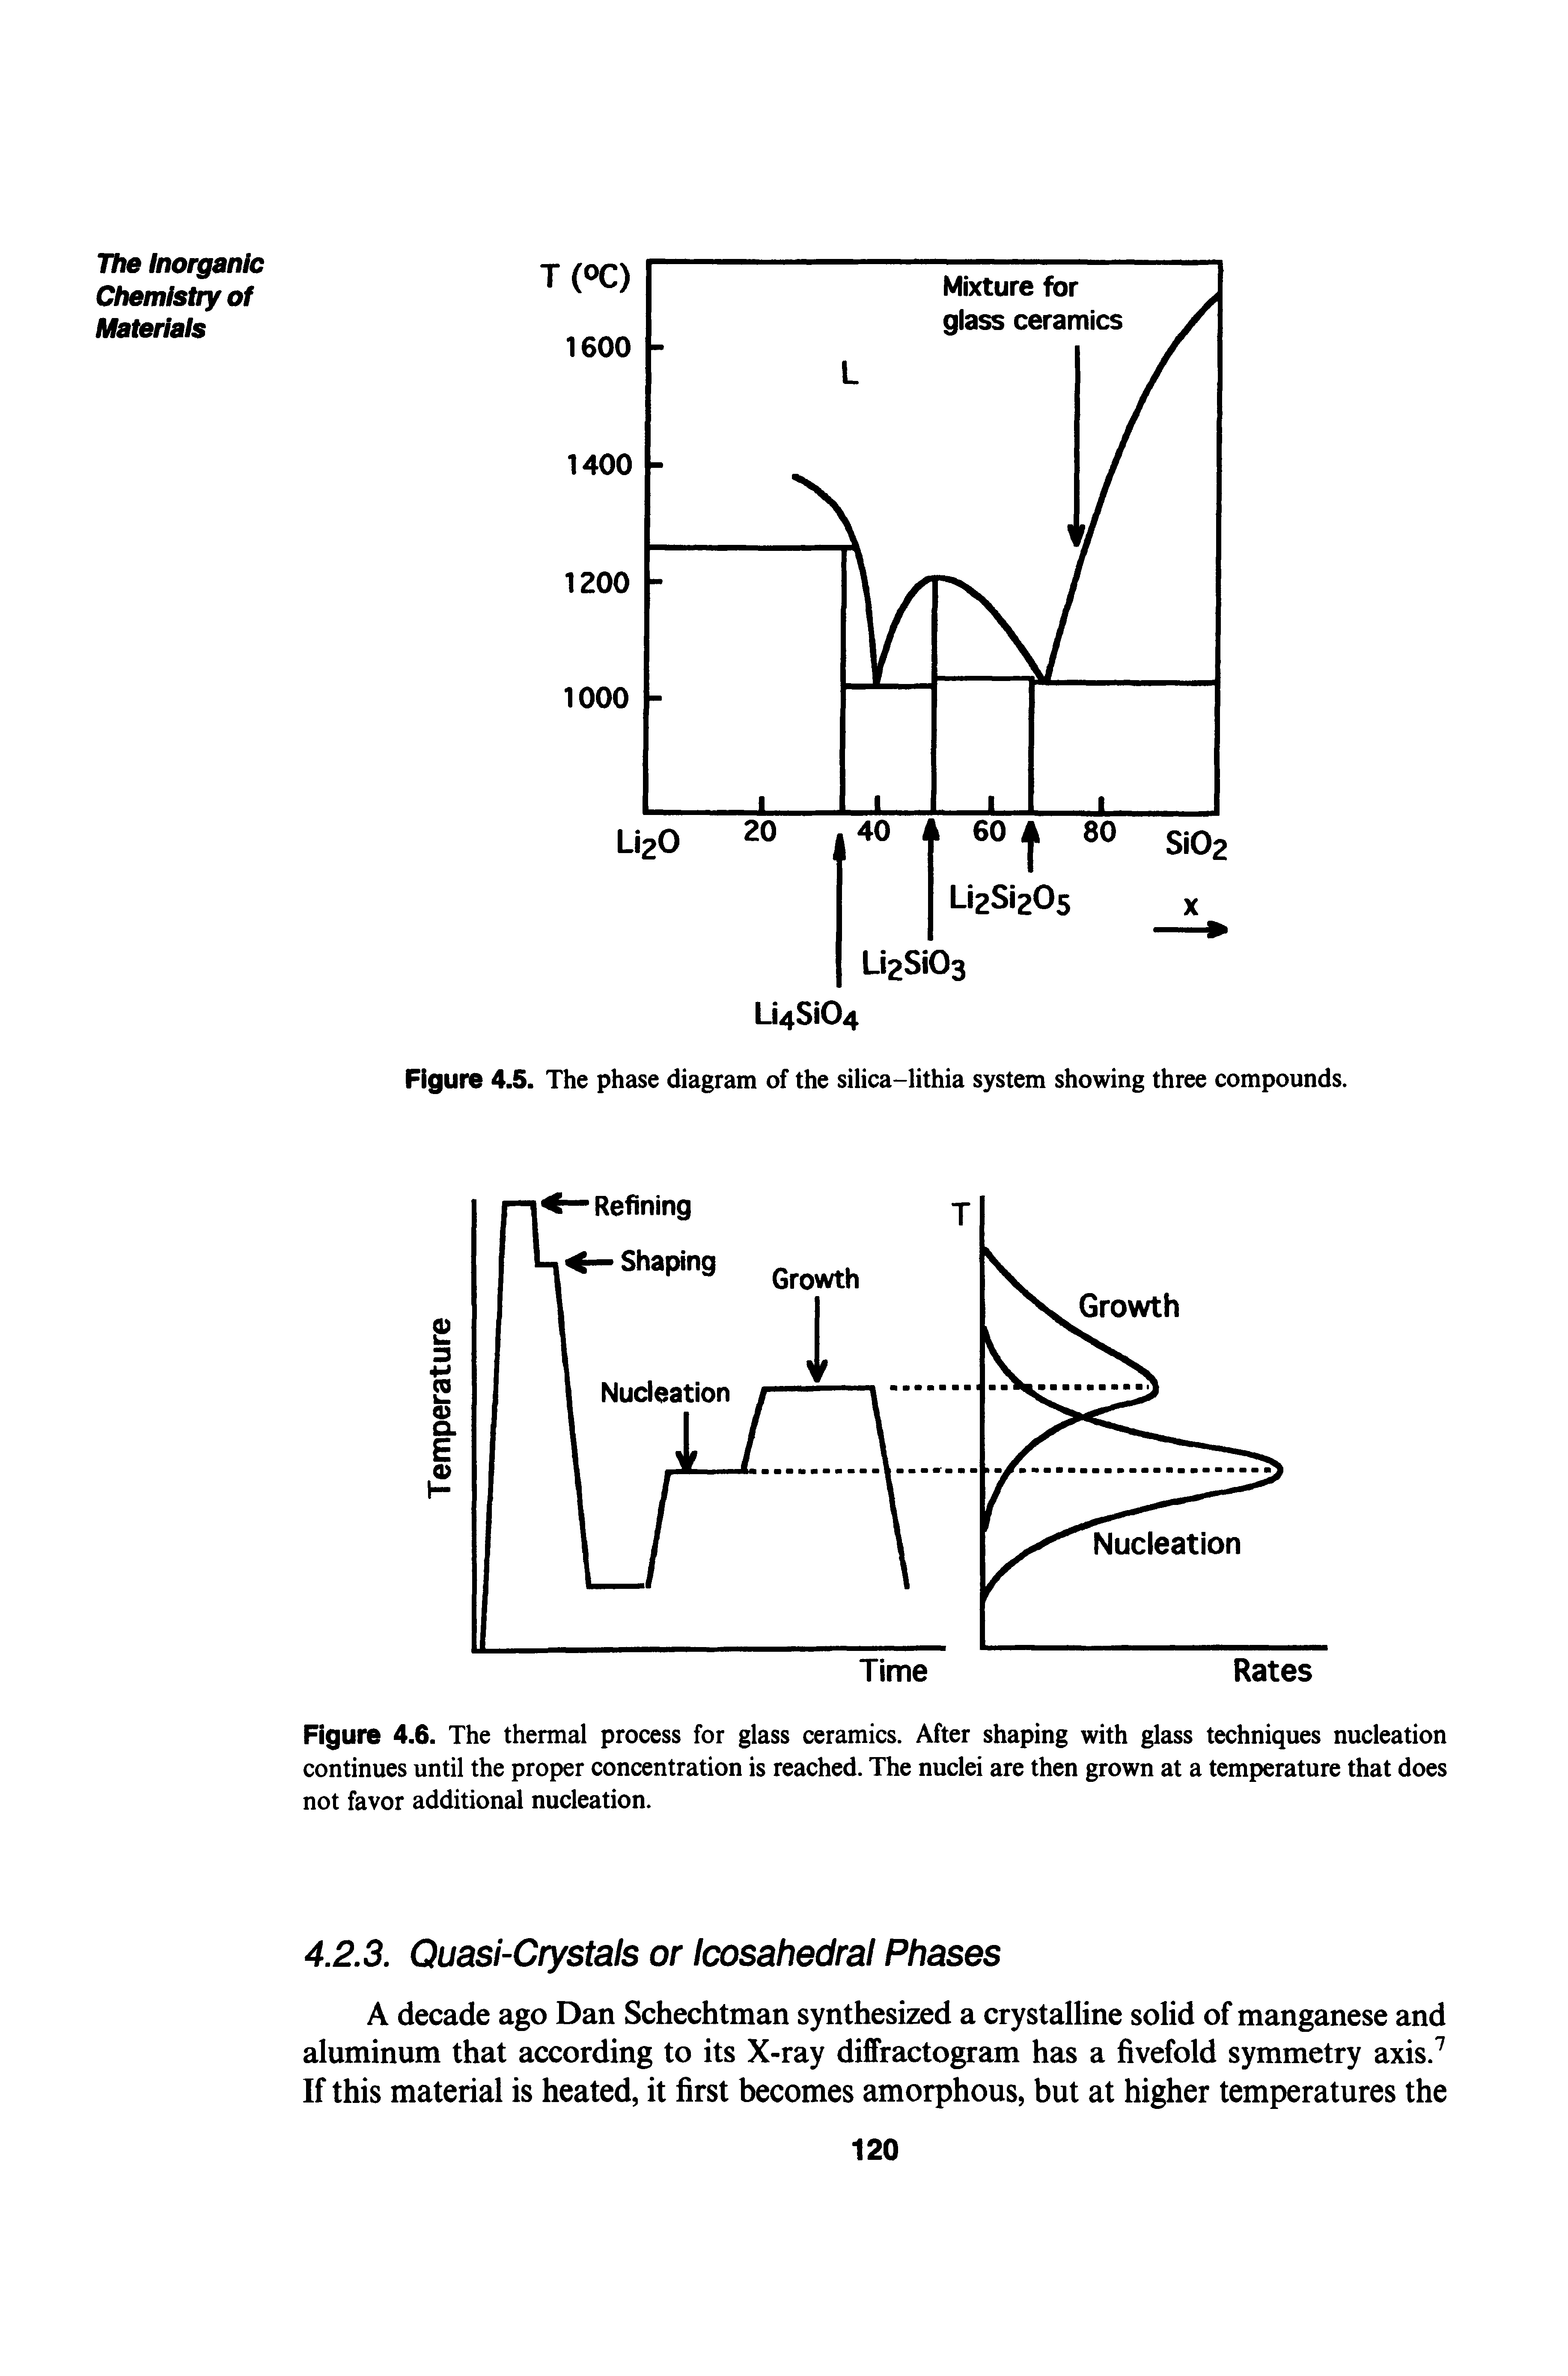 Figure 4.6. The thermal process for glass ceramics. After shaping with glass techniques nucleation continues until the proper concentration is reached. The nuclei are then grown at a temperature that does not favor additional nucleation.